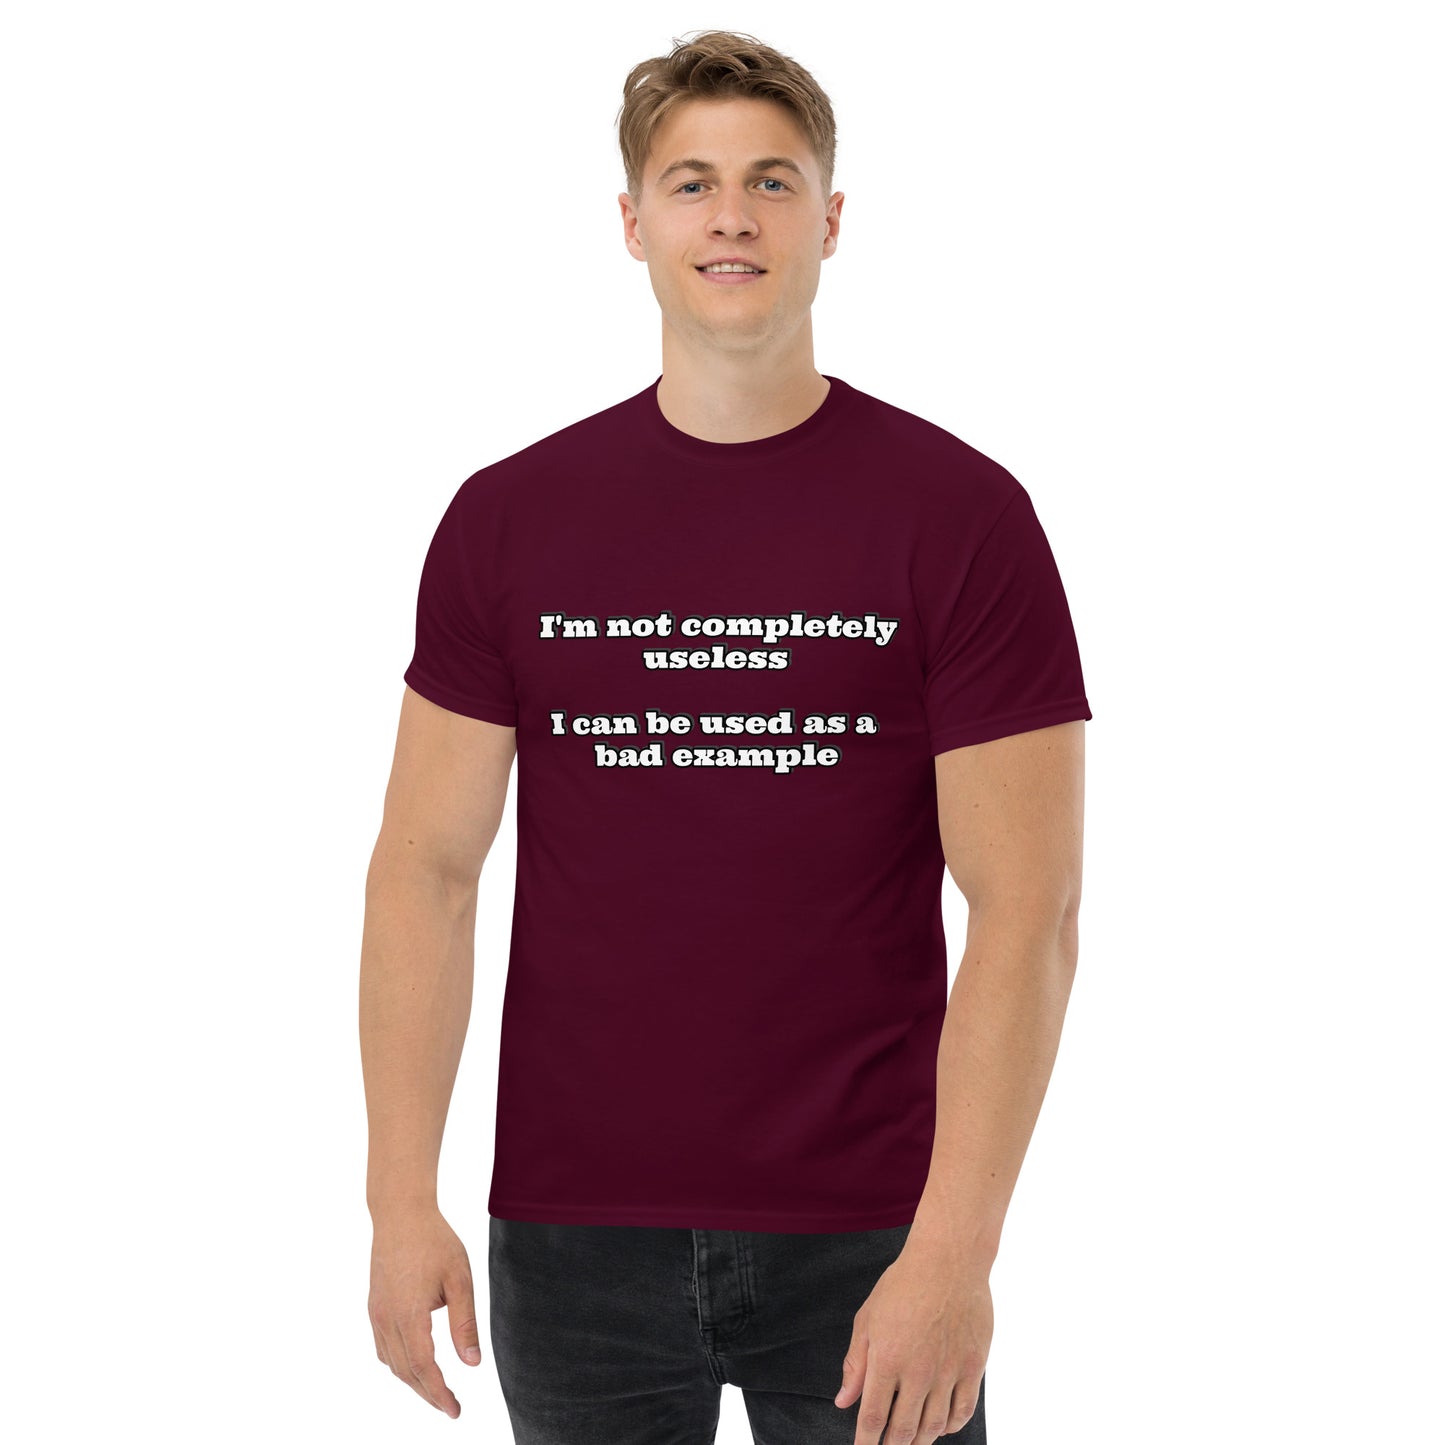 Men with maroon t-shirt with text “I'm not completely useless I can be used as a bad example”